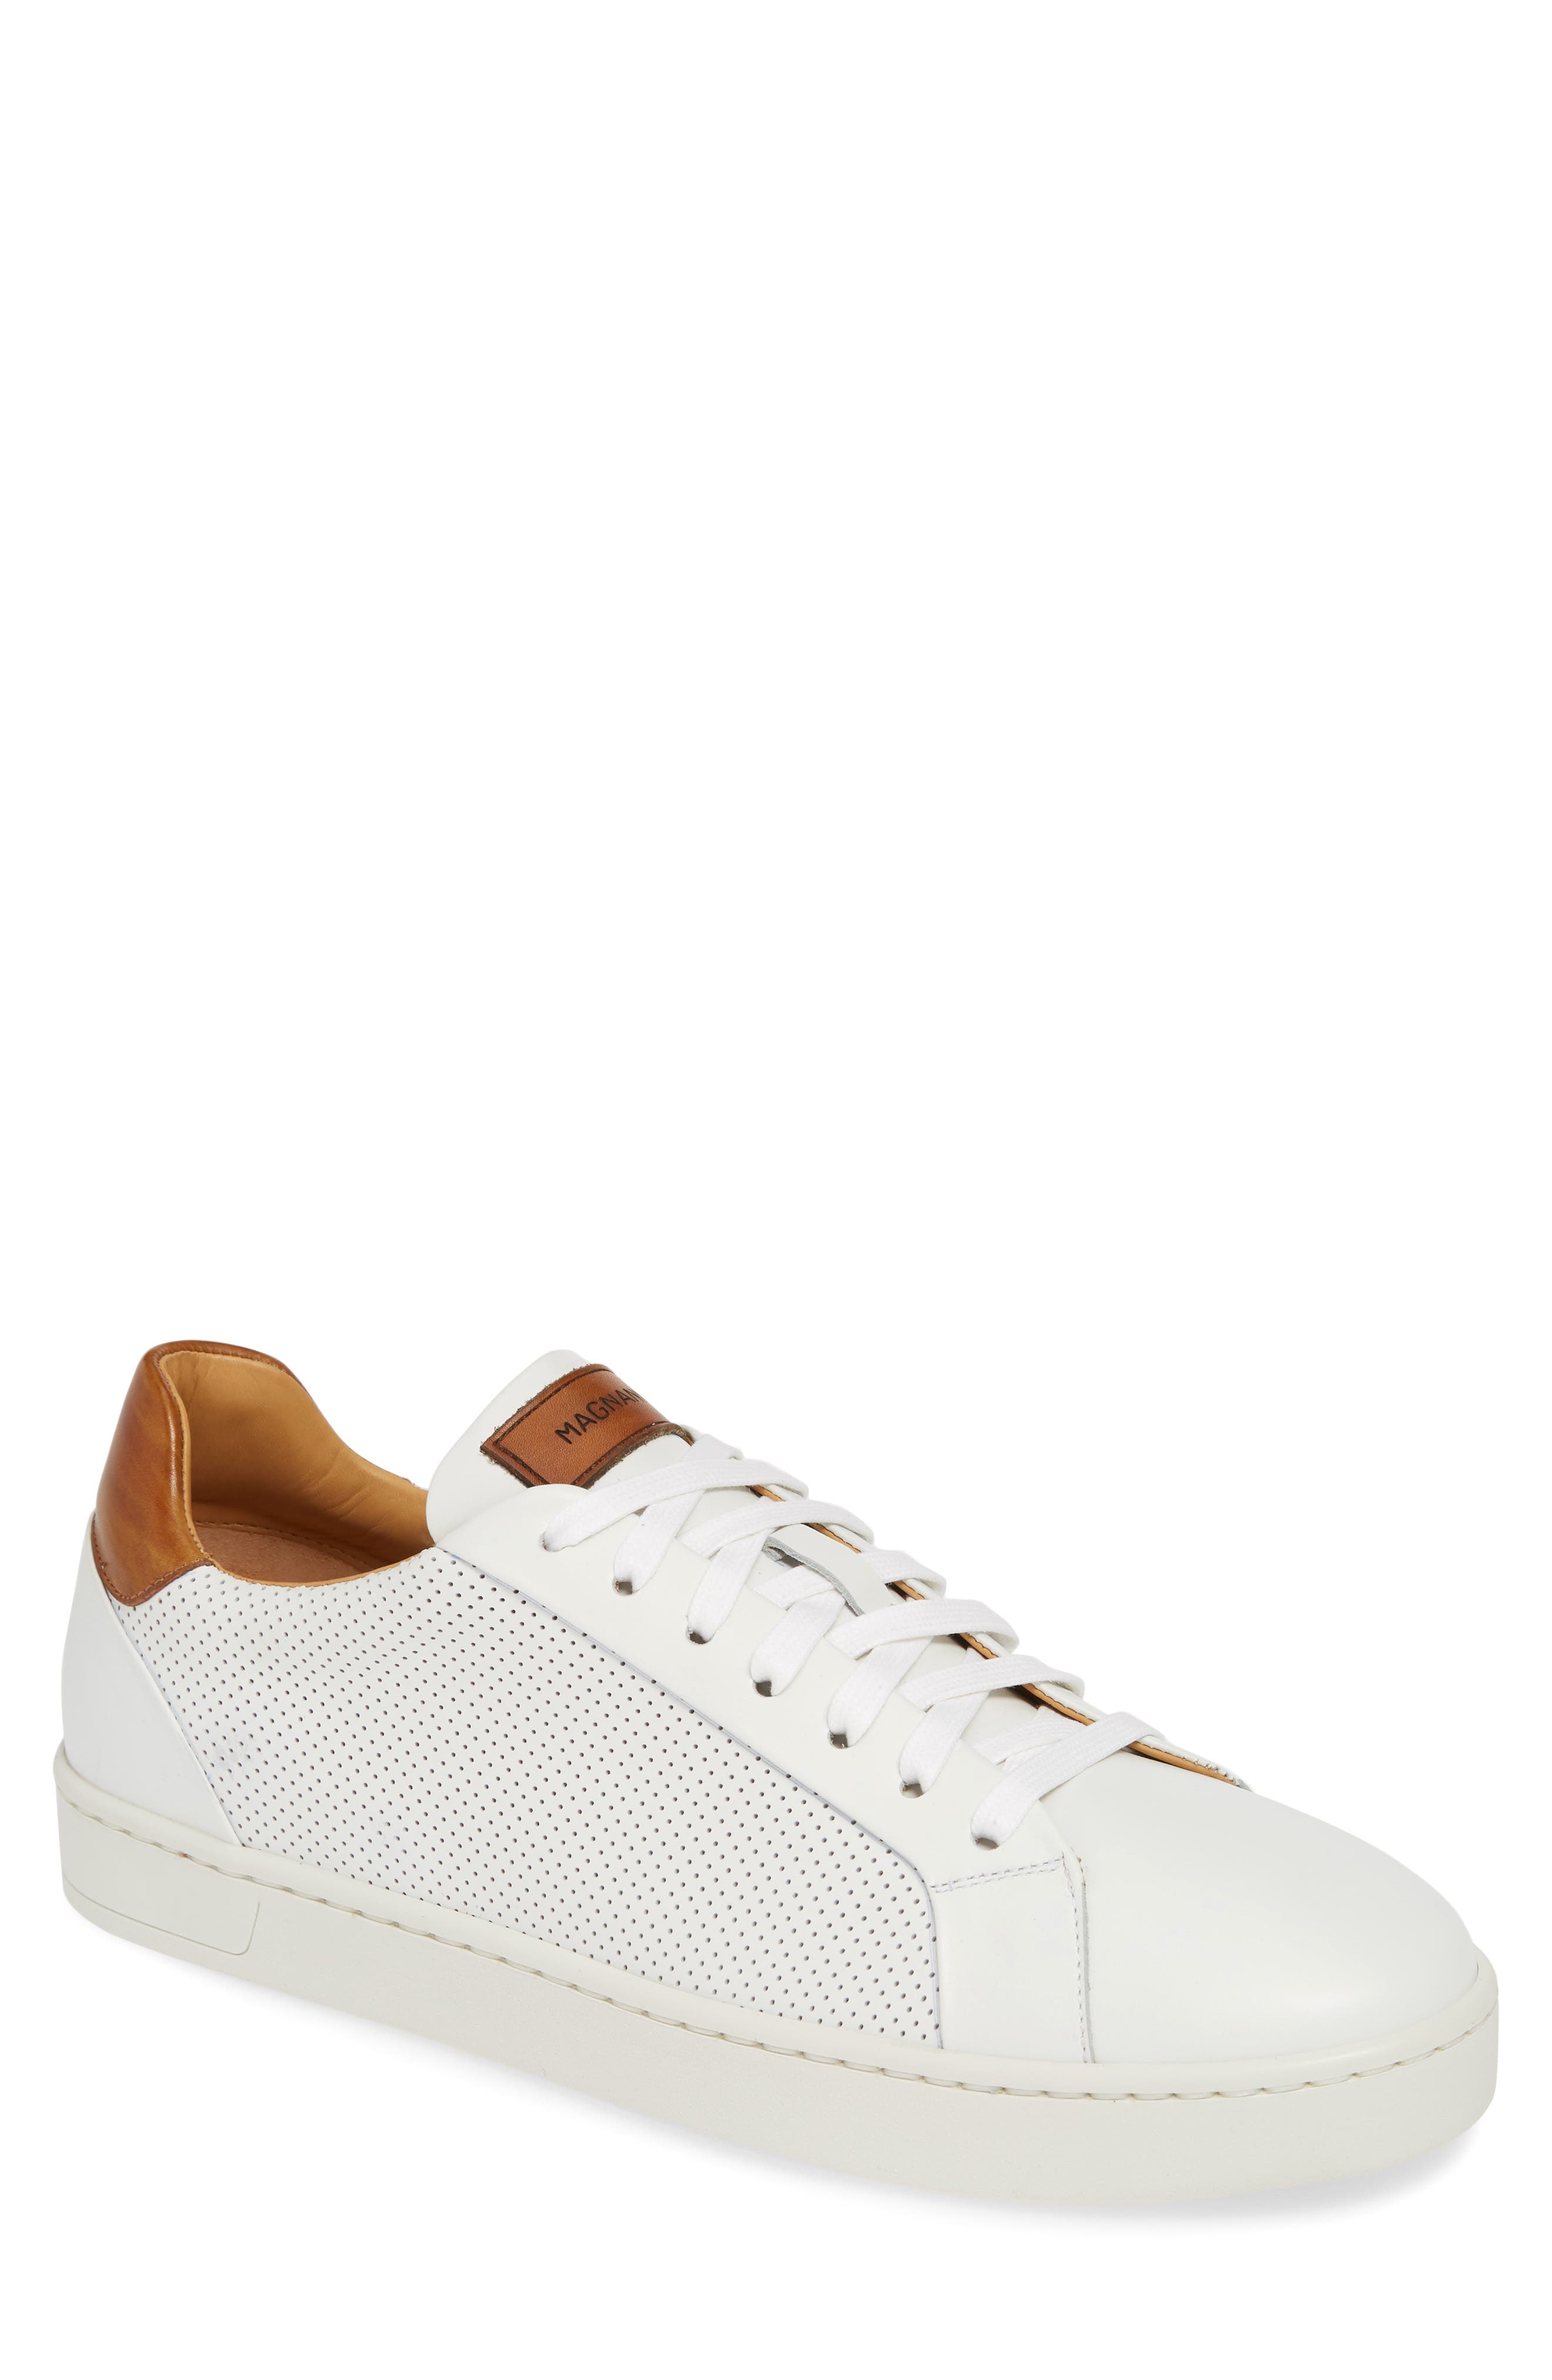 Magnanni All-White Sneakers | Nordstrom